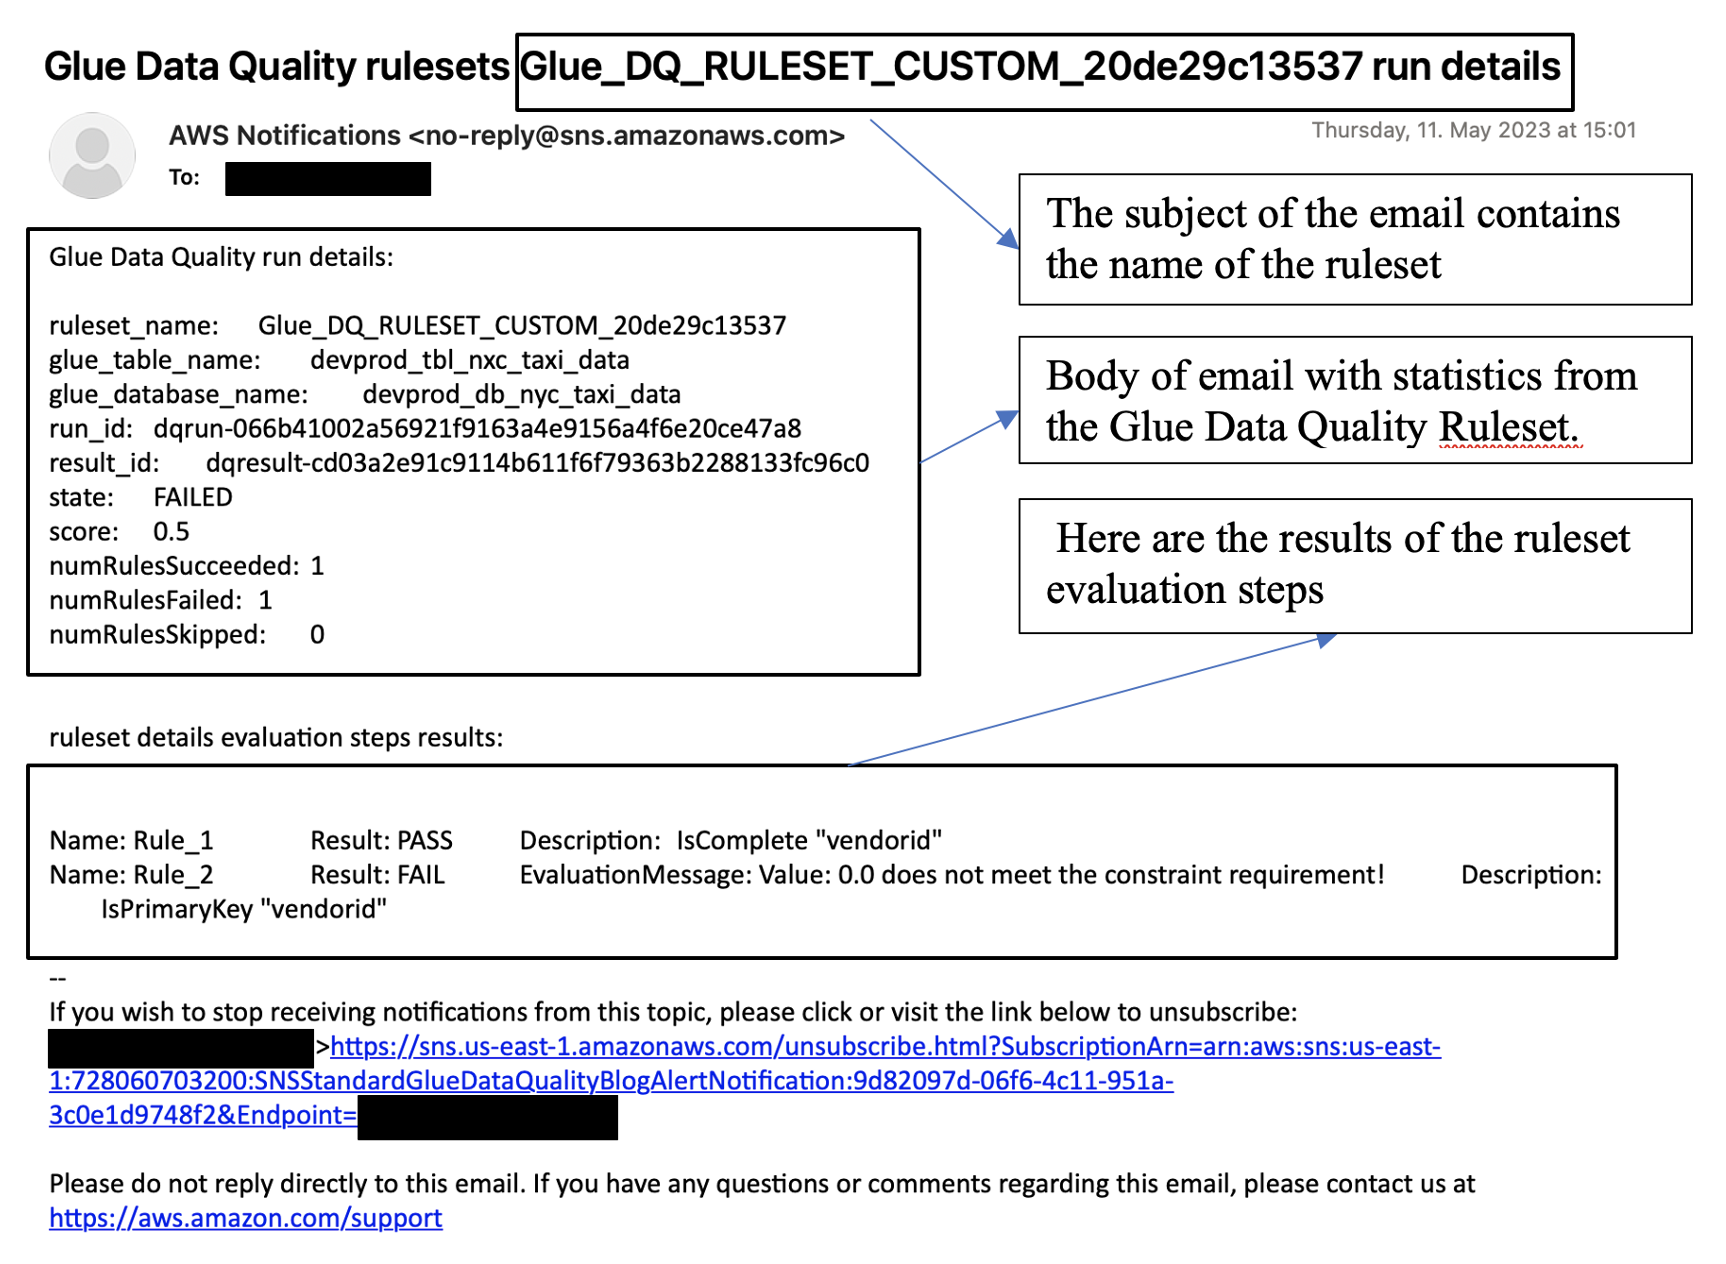 
            Data quality notification formatted as an email
        